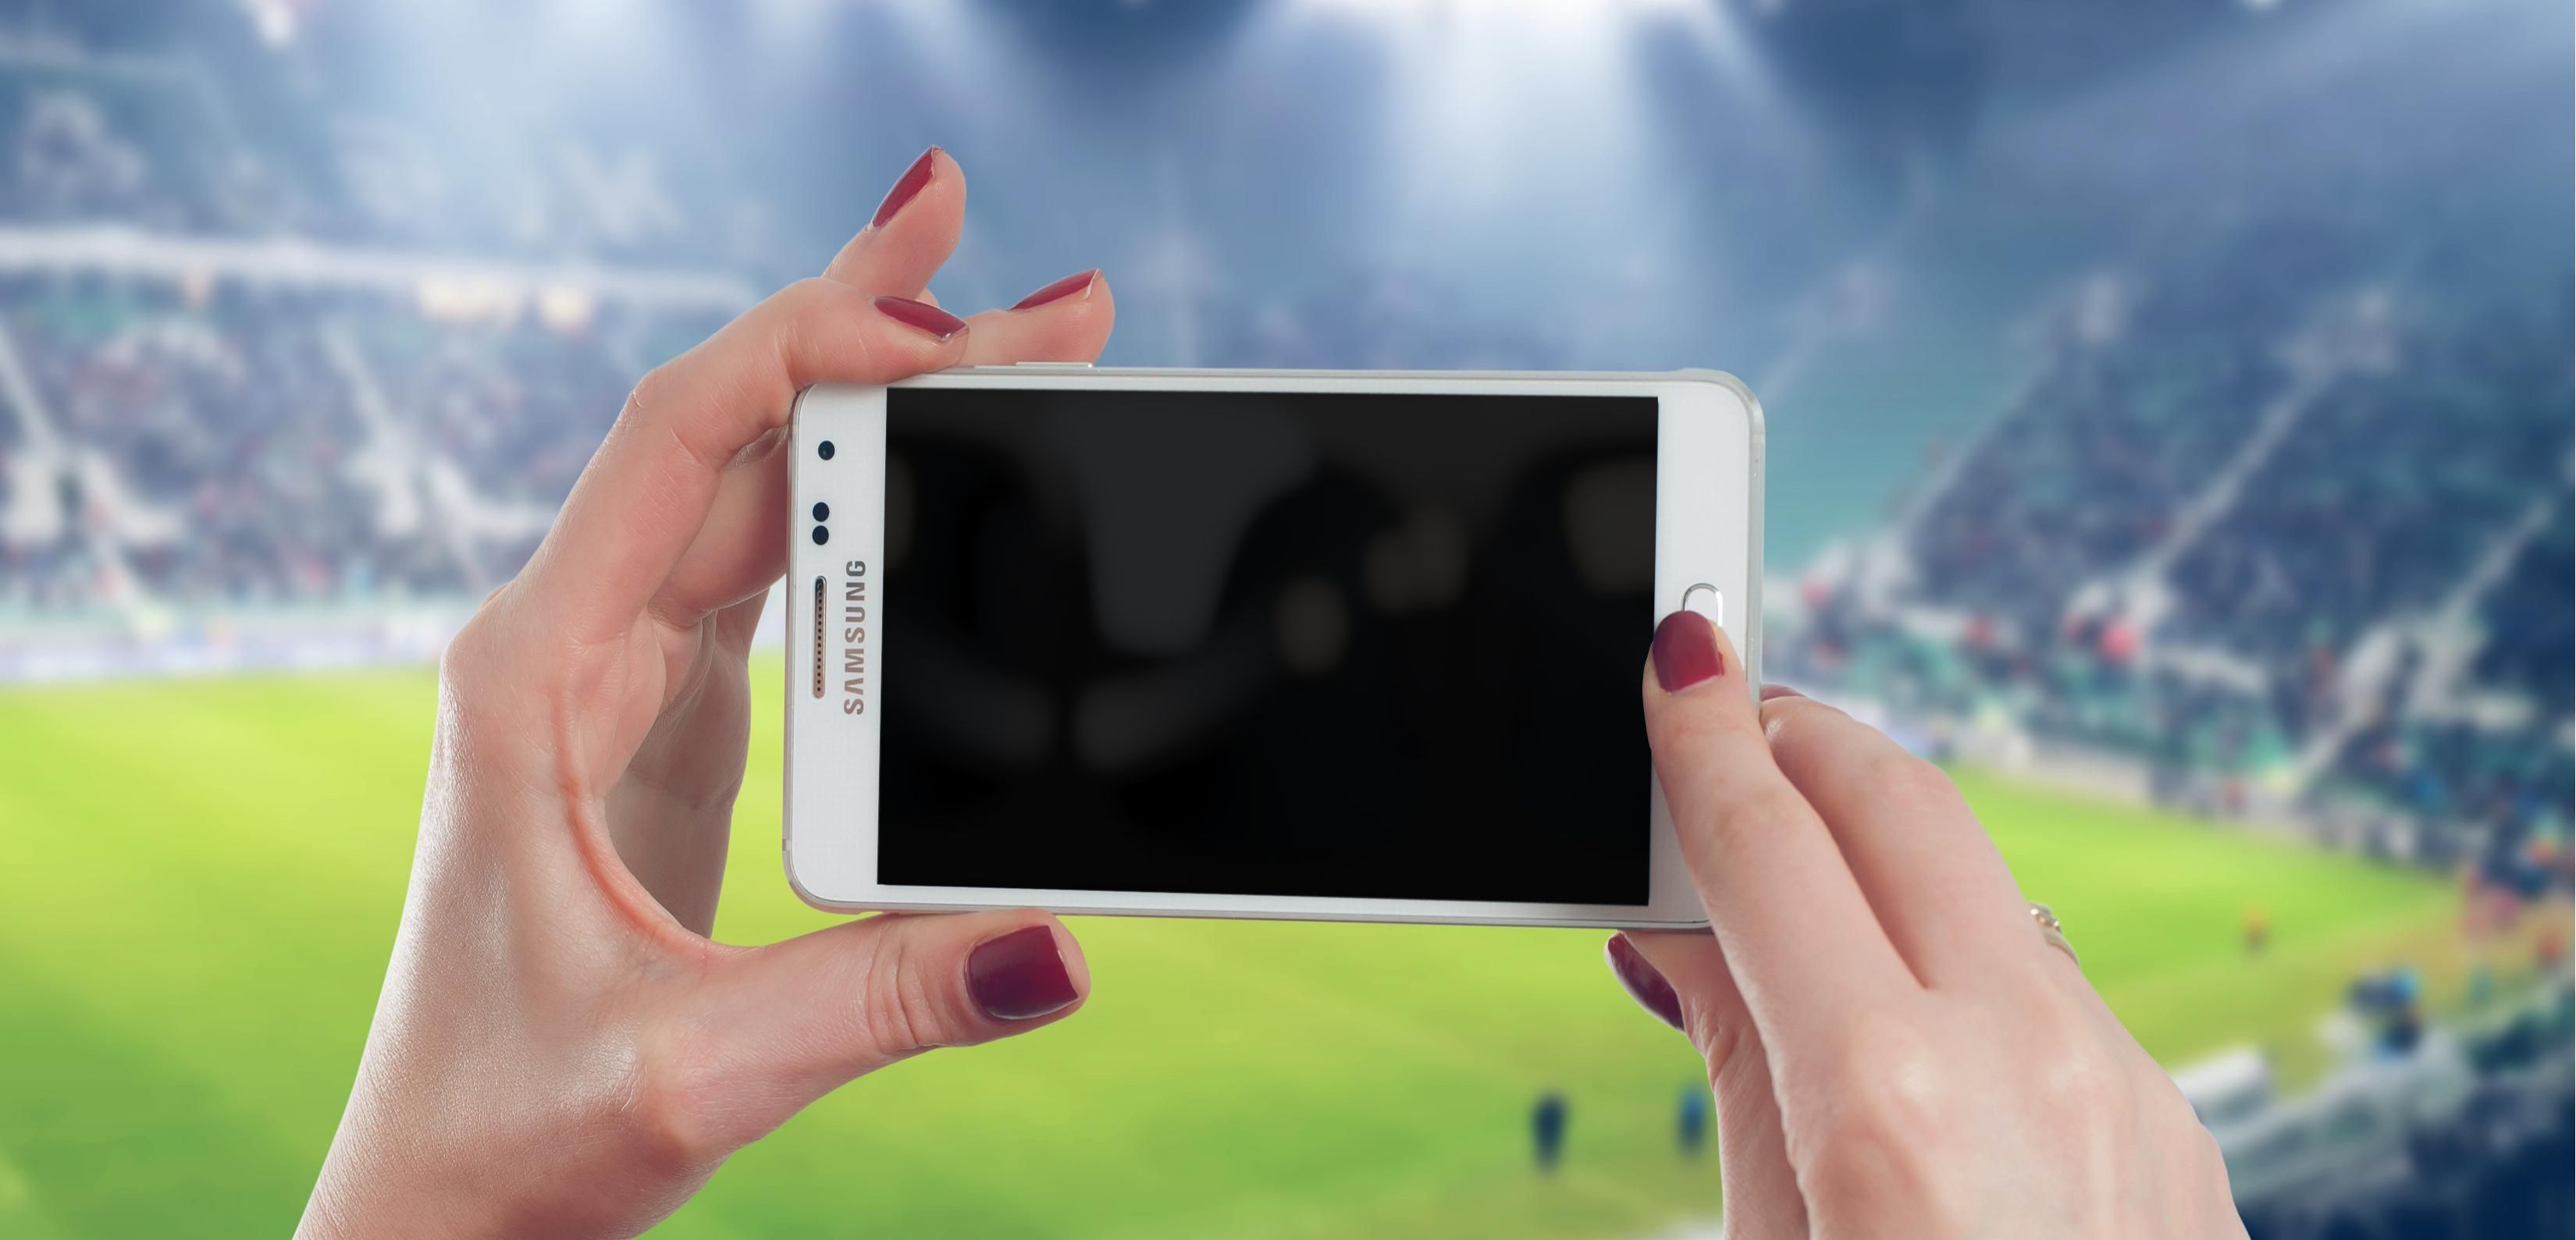 Woman Taking a Picture on a Football Field But Camera Is Black on Android